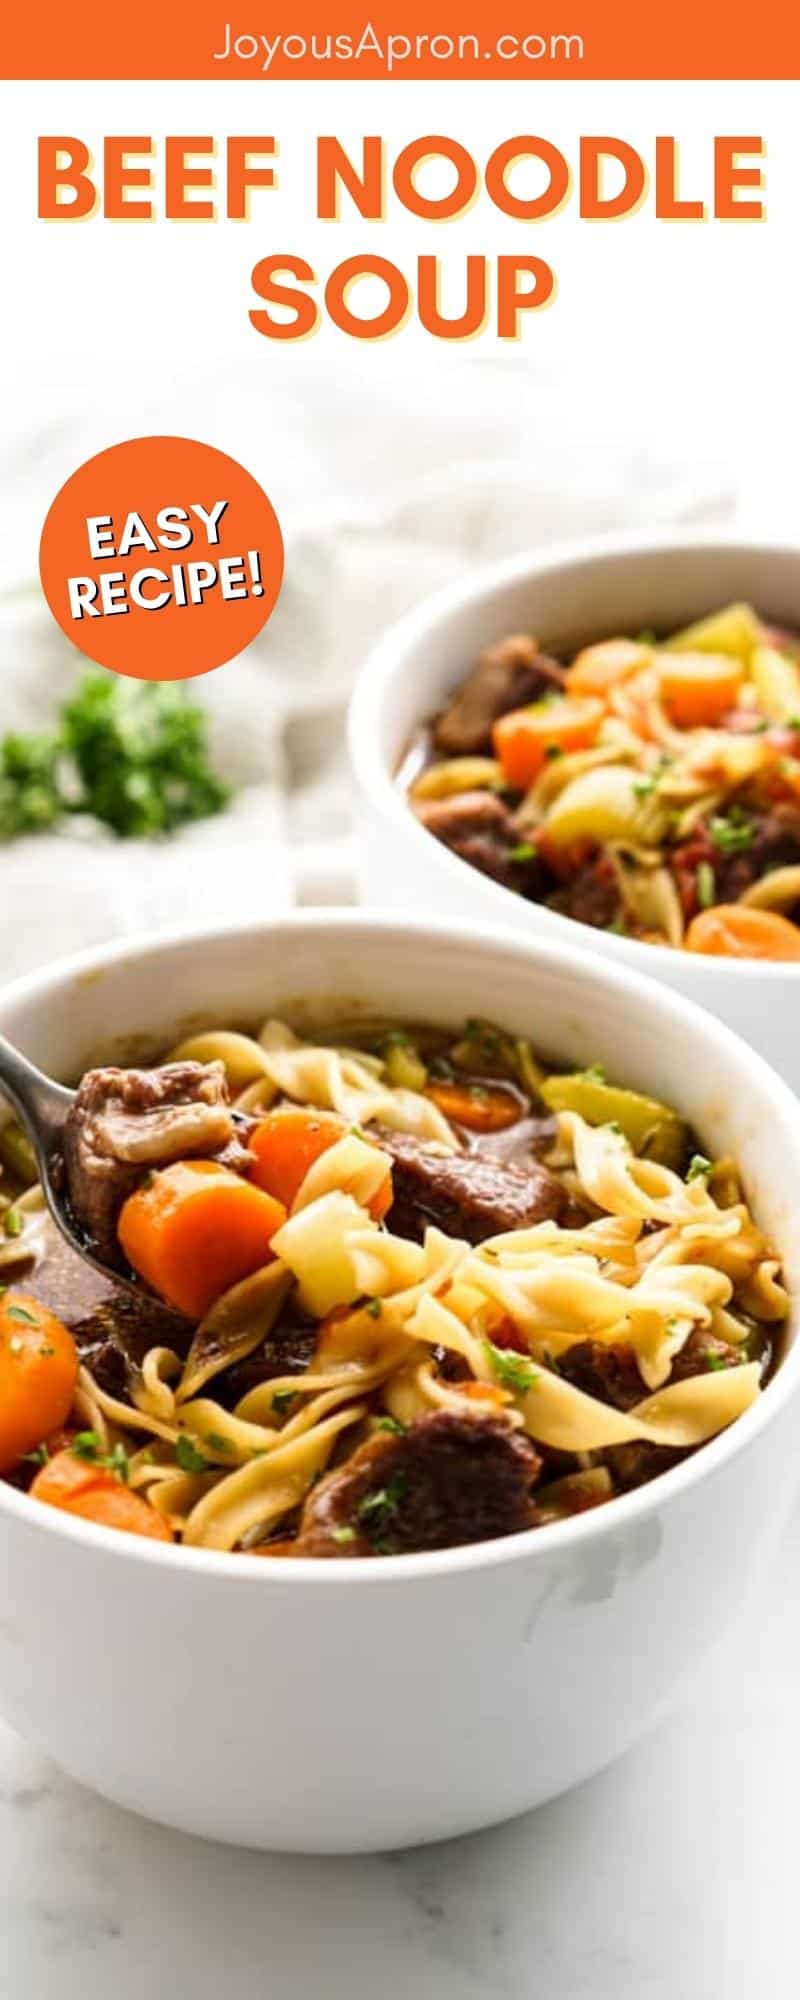 Beef Noodle Soup - tender steaks, egg noodles, carrots, celery, and tomatoes simmered in flavorful herb-infused beef broth. Cozy and comforting homemade soup recipe for the Fall and winter! via @joyousapron